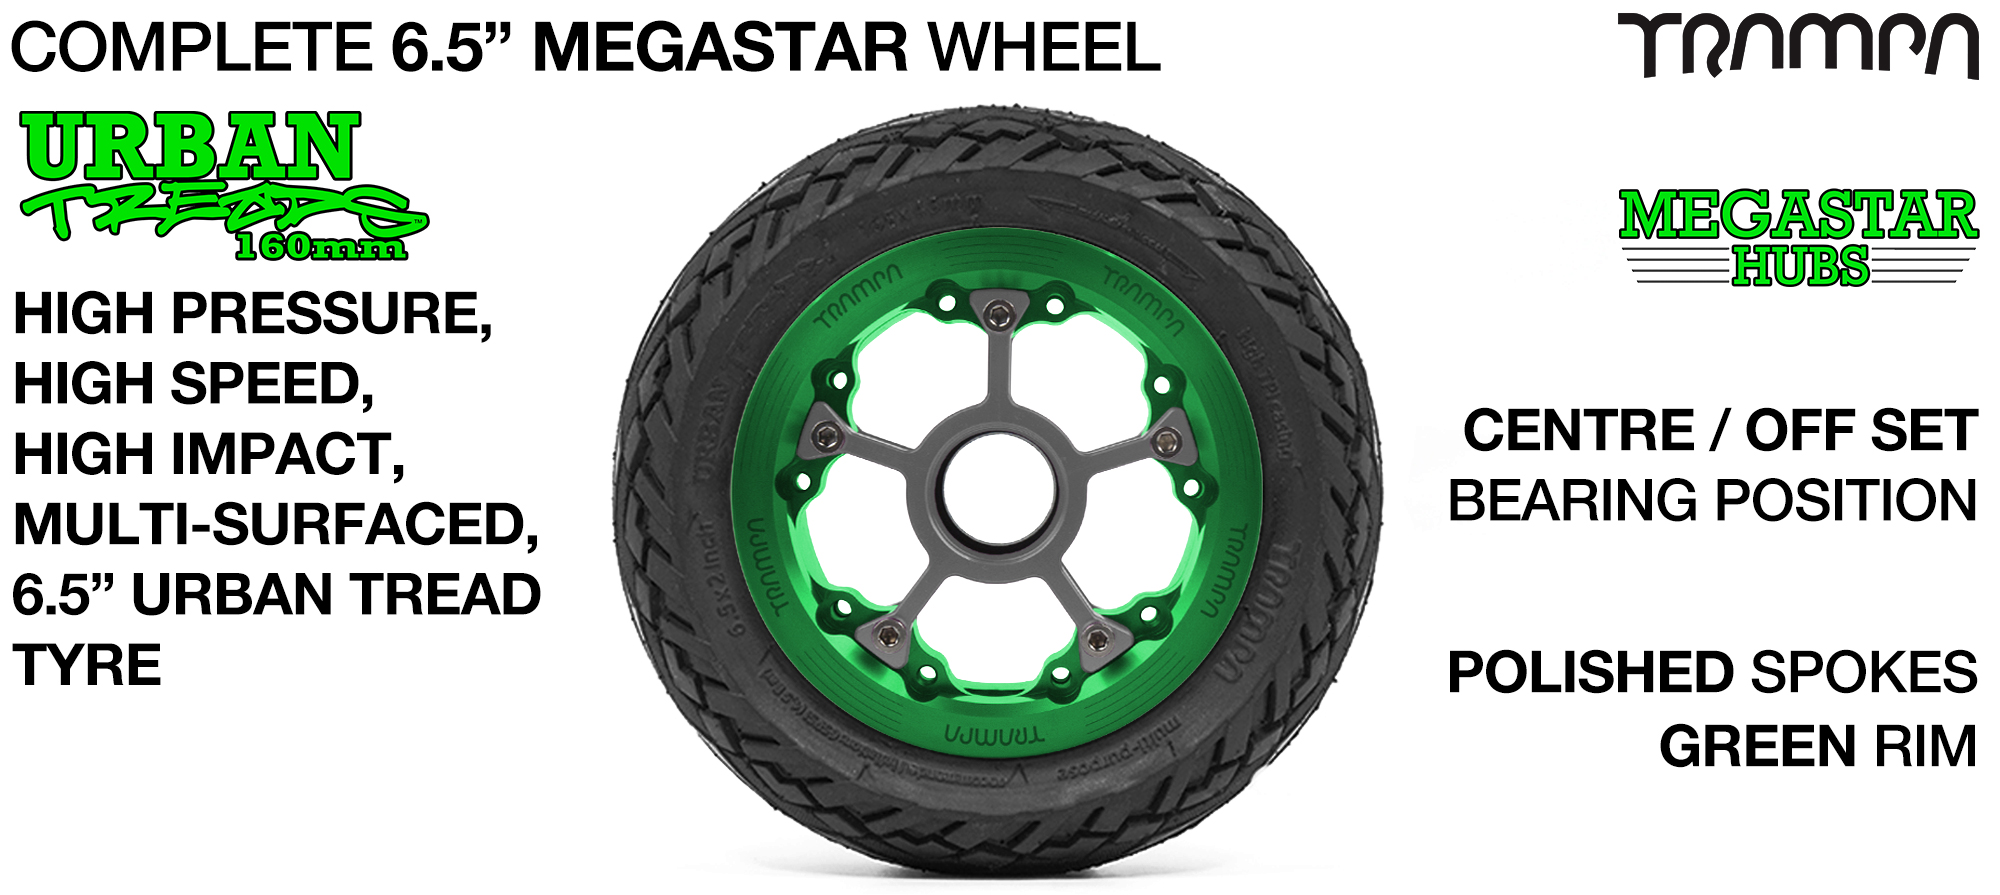 CENTER-SET MEGASTAR 8 Hub with GREEN Rims & POLISHED Spokes with the amazing Low Profile 6.5 Inch URBAN Treads Tyres